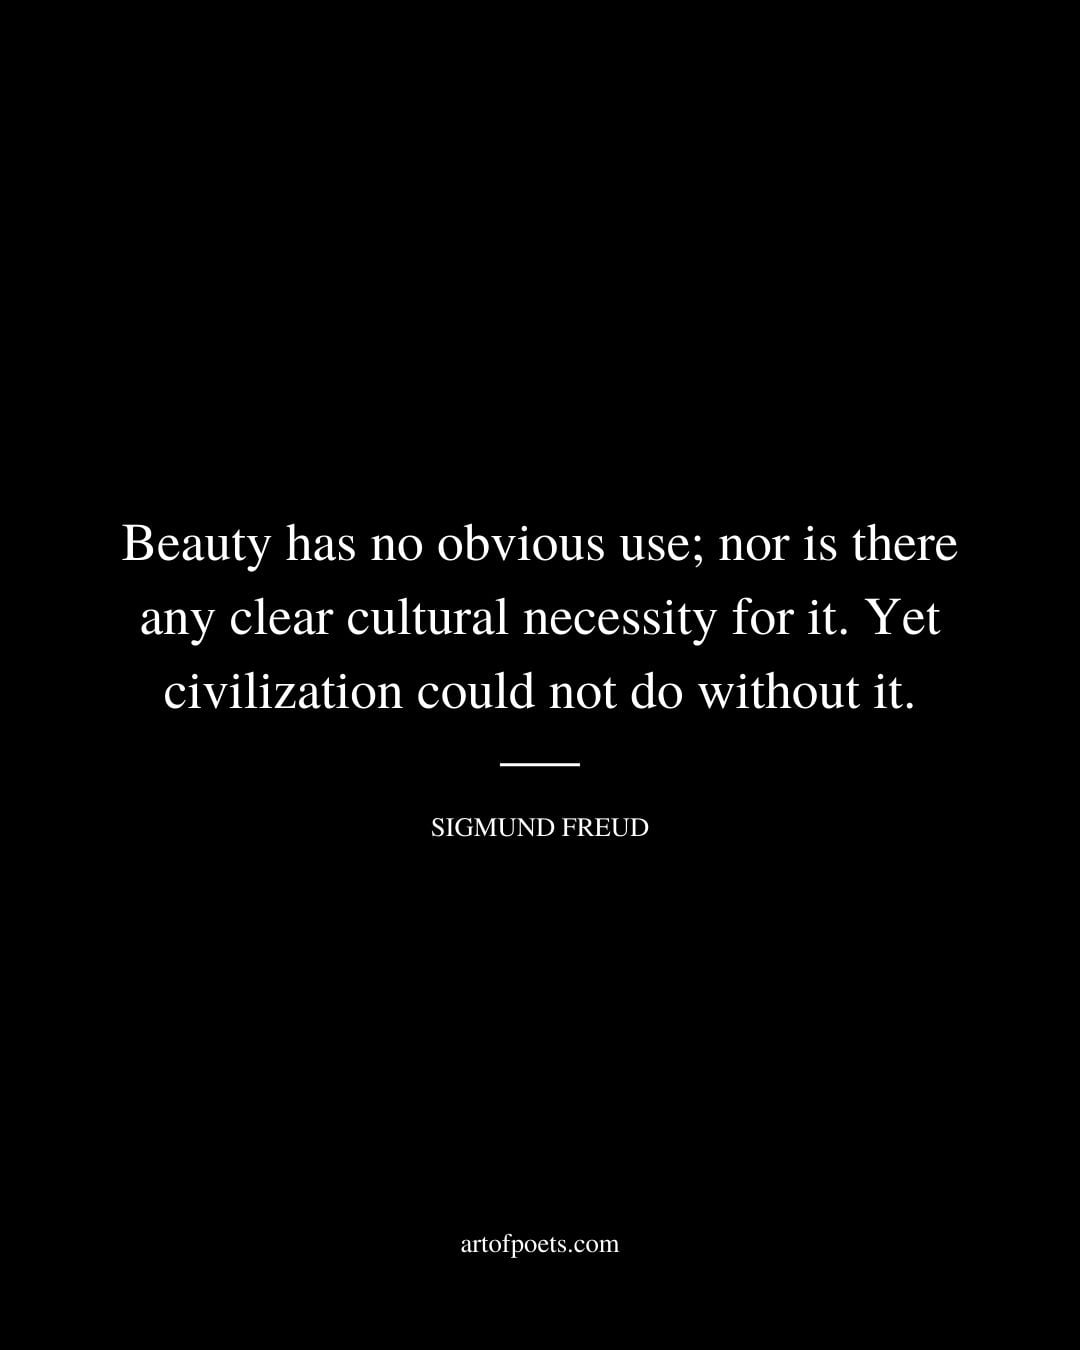 Beauty has no obvious use nor is there any clear cultural necessity for it. Yet civilization could not do without it. Sigmund Freud